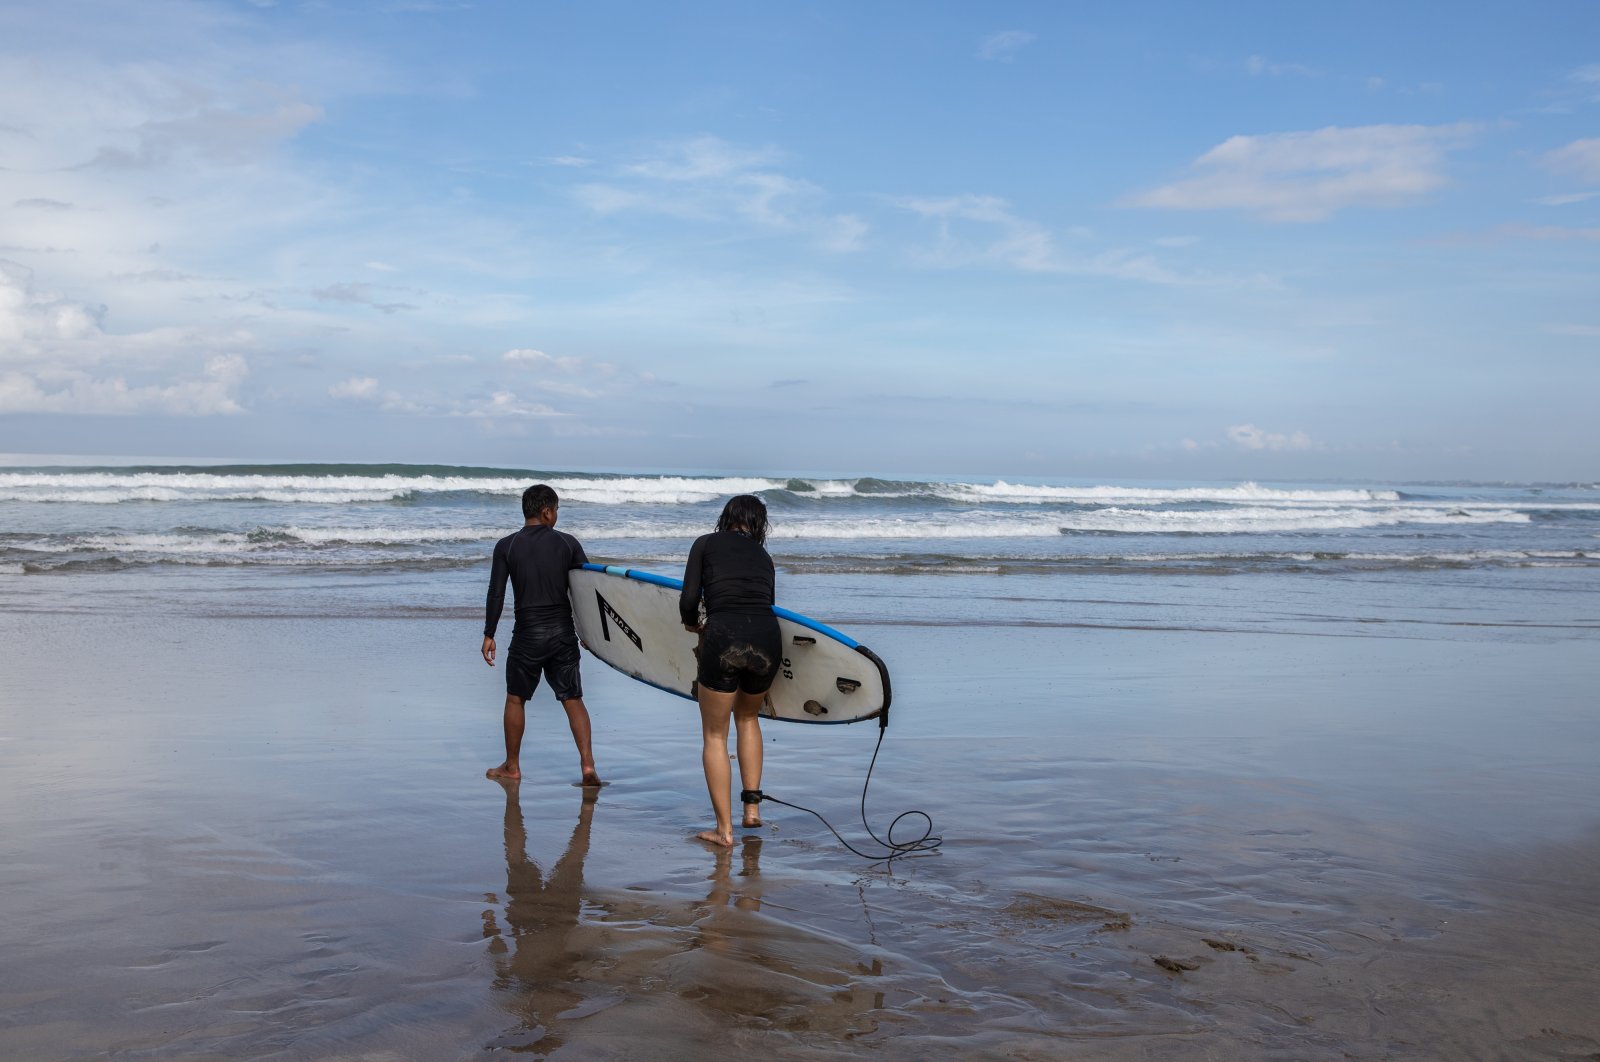 People learn to surf at the beach in the Kuta area of Bali, Indonesia, Oct. 29, 2021. (Bloomberg via Getty Images) 